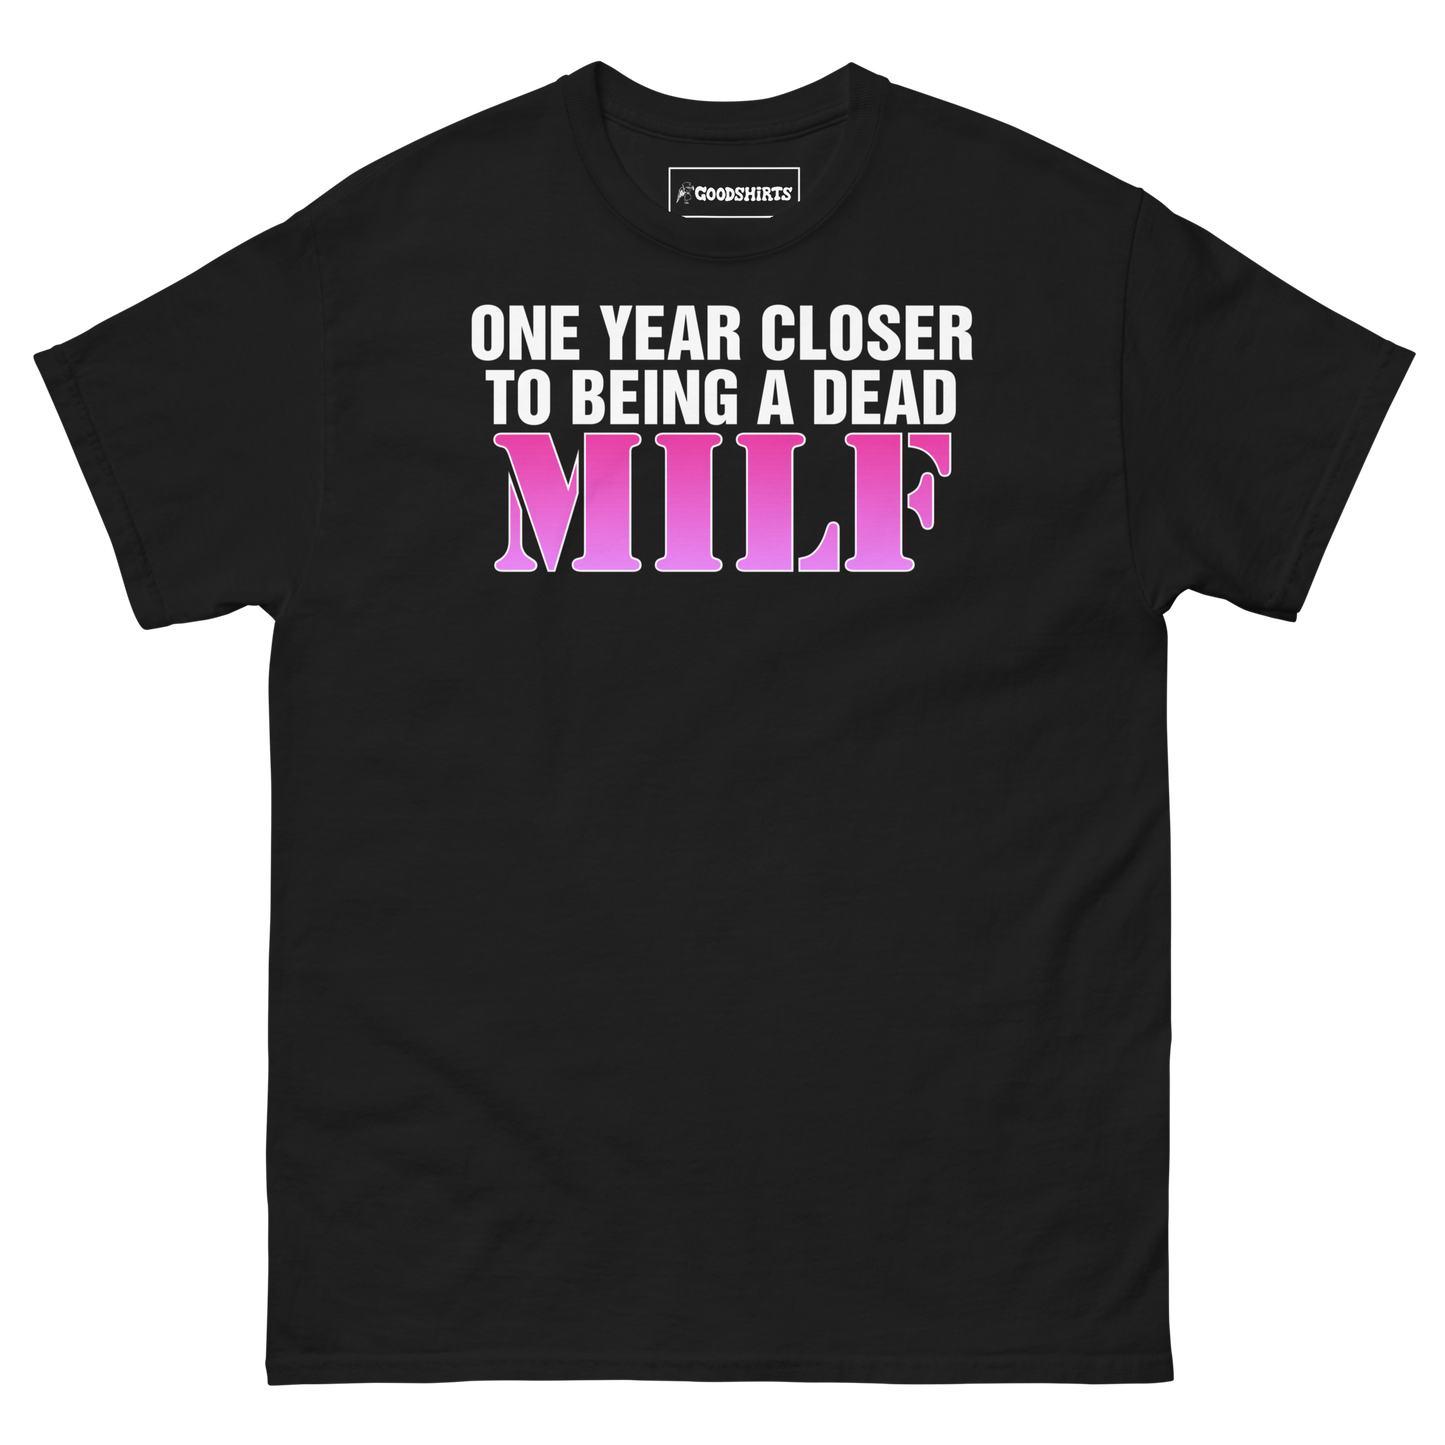 One Year Closer To Being A Dead MILF.